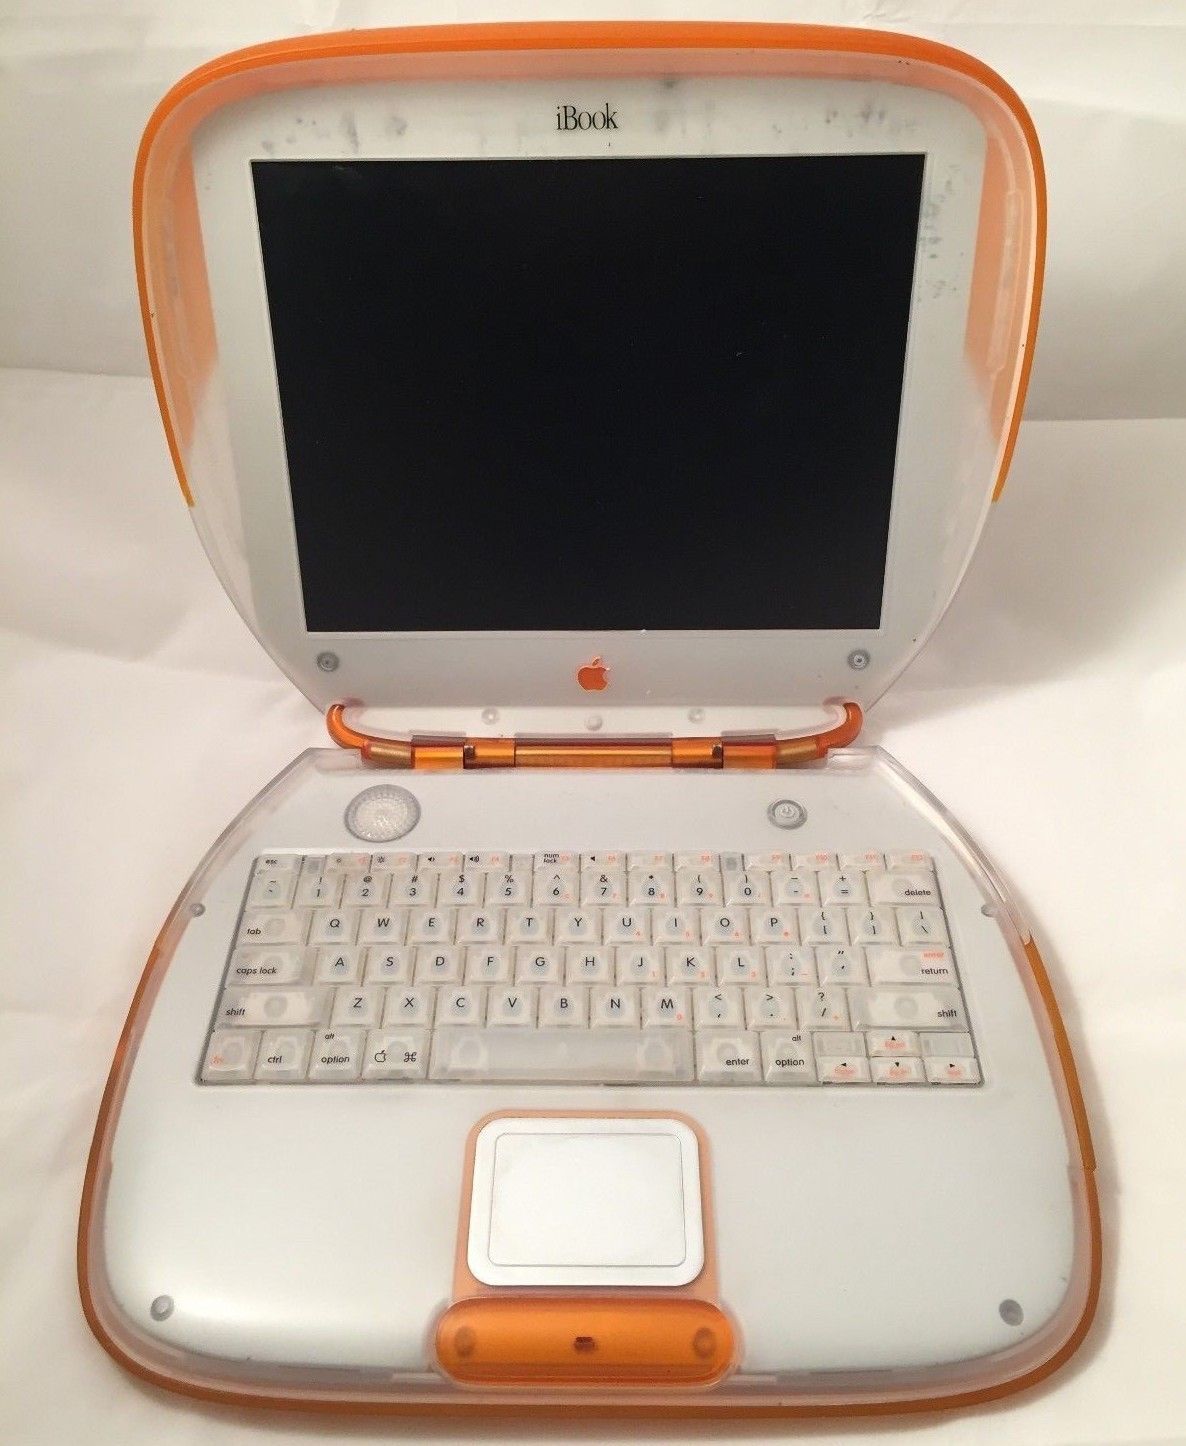 Good old days when Apple laptops looked like children toys.